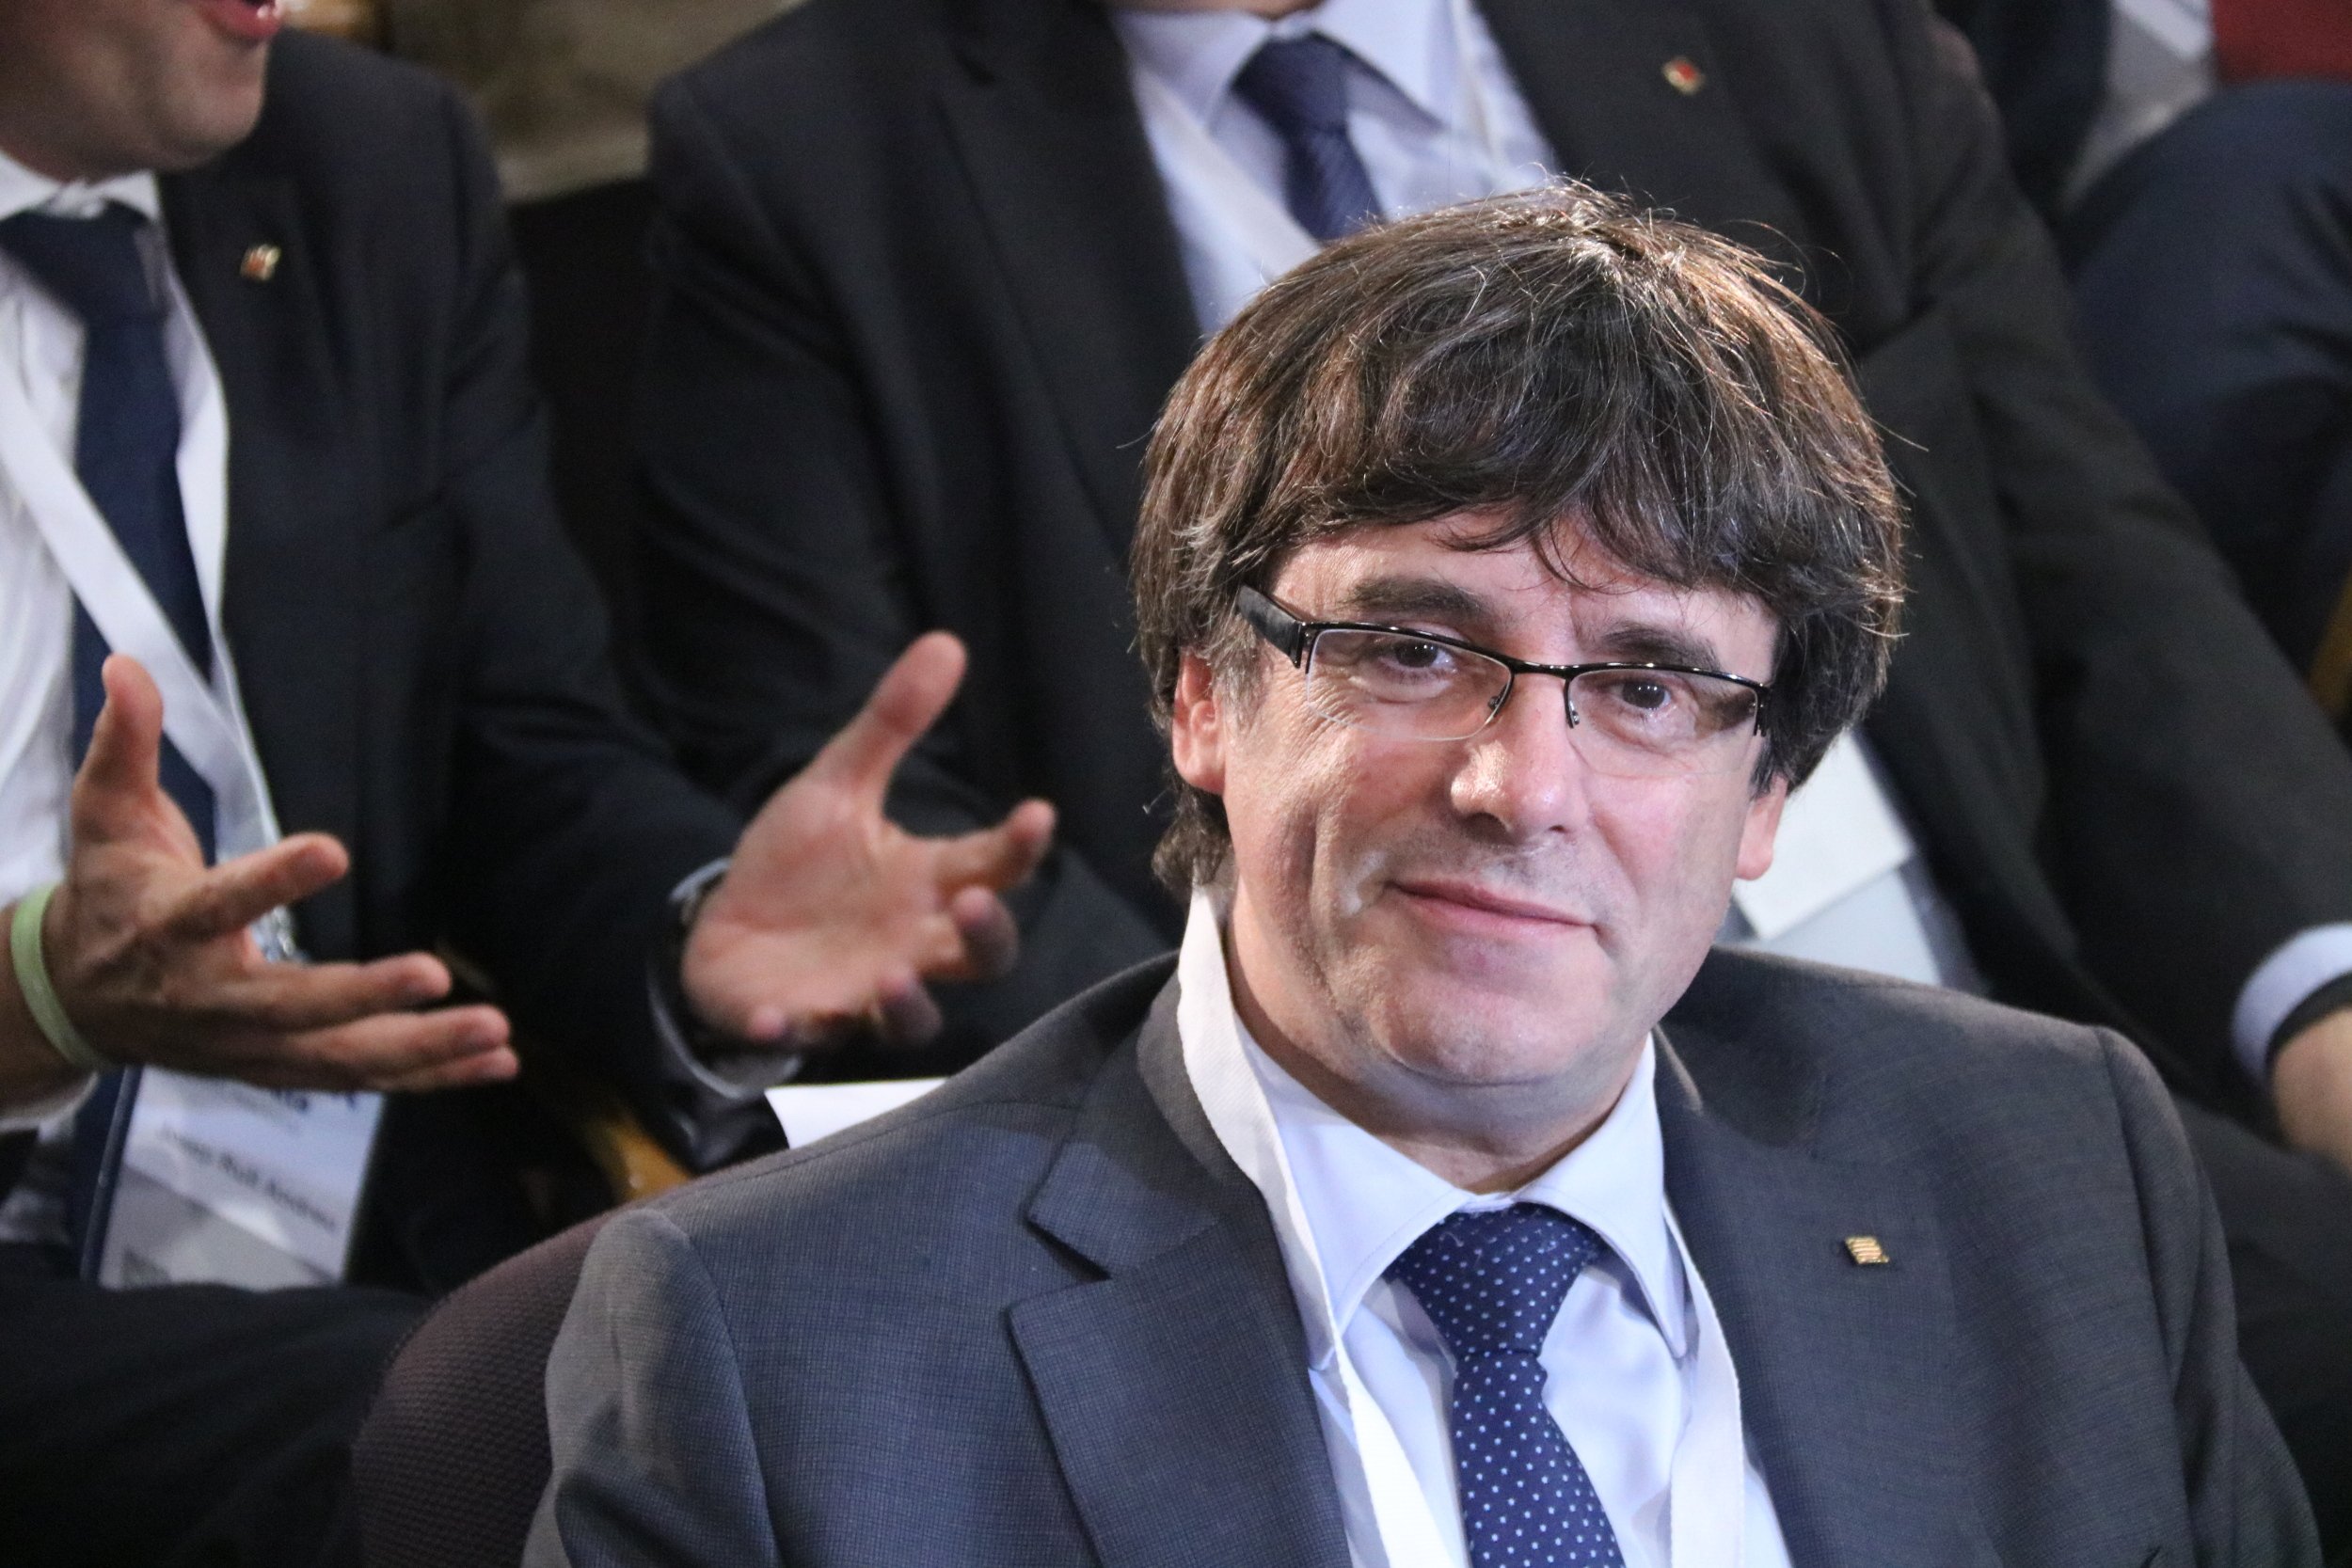 Puigdemont warns Rajoy that a vote on independence will be held if Article 155 is applied